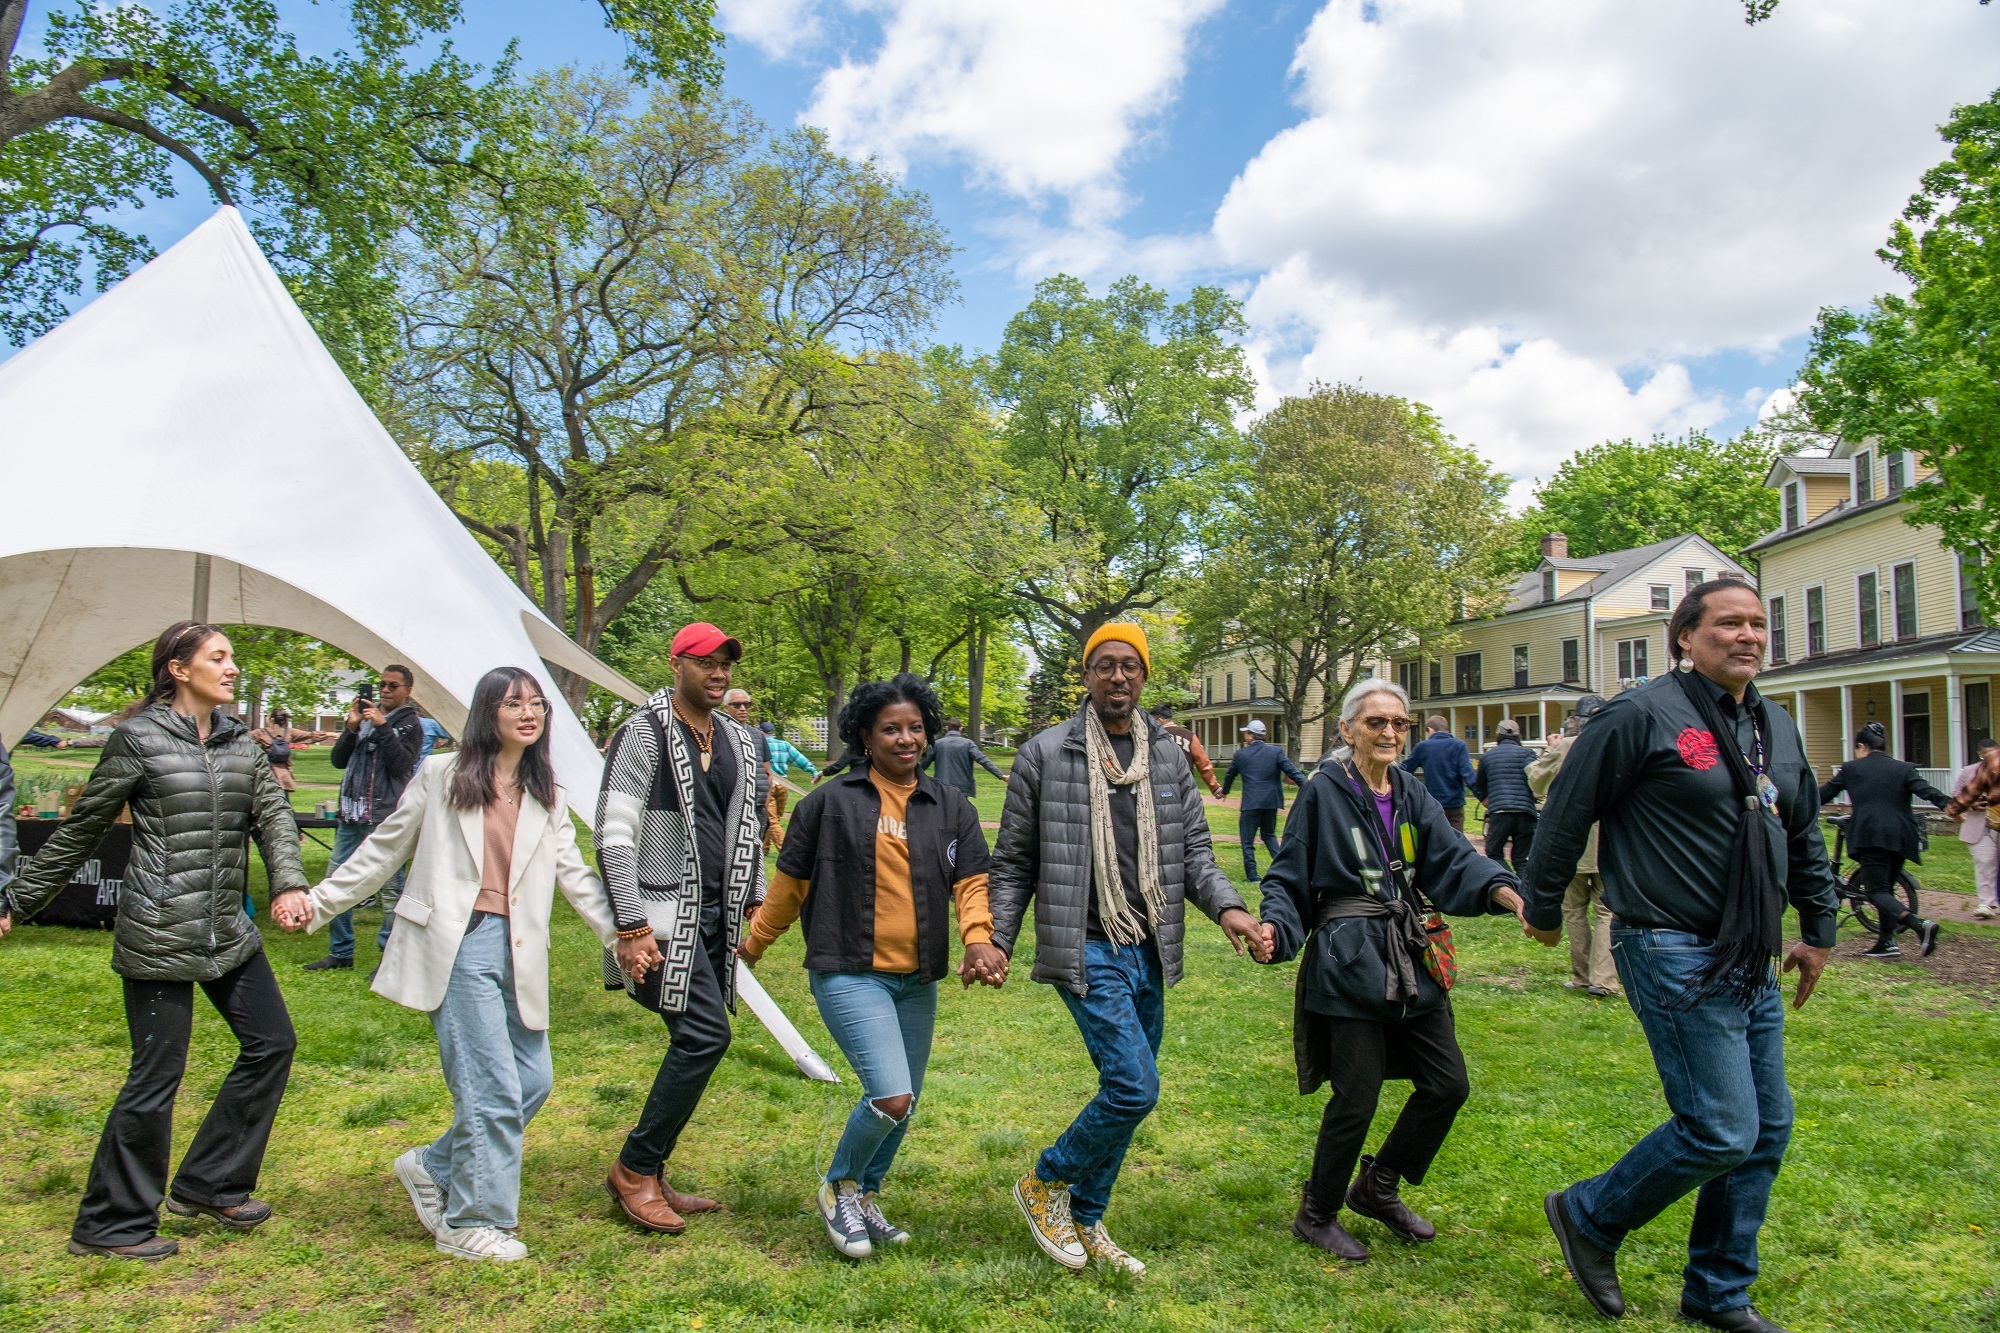 You can take in a ton of free art on Governors Island on July 15